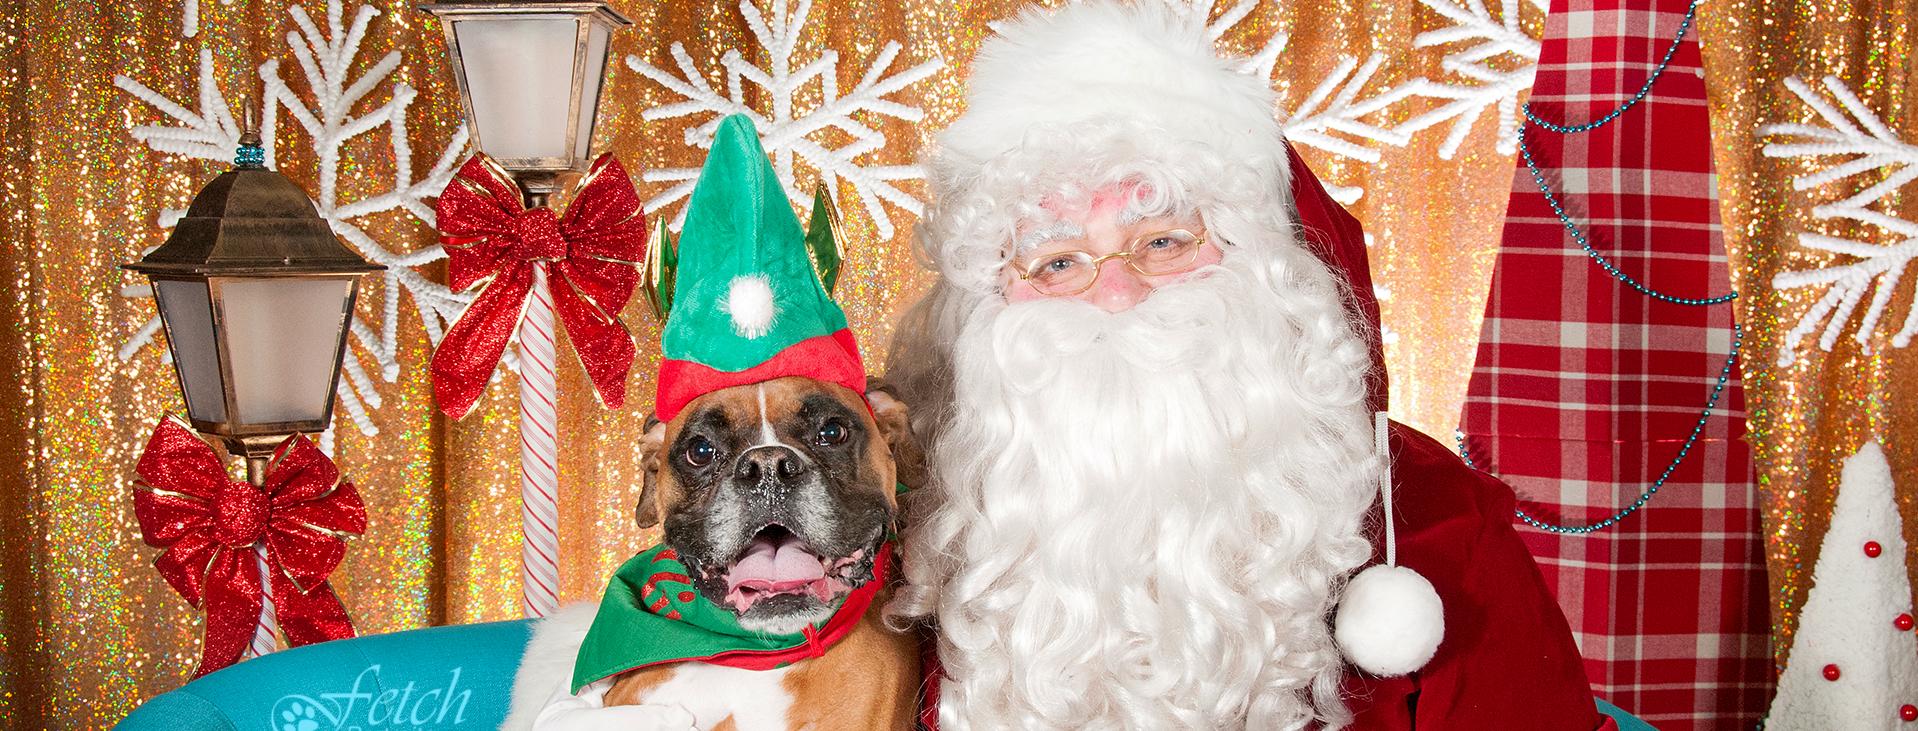 Brown and white boxer with a green elf hat on sitting next to santa